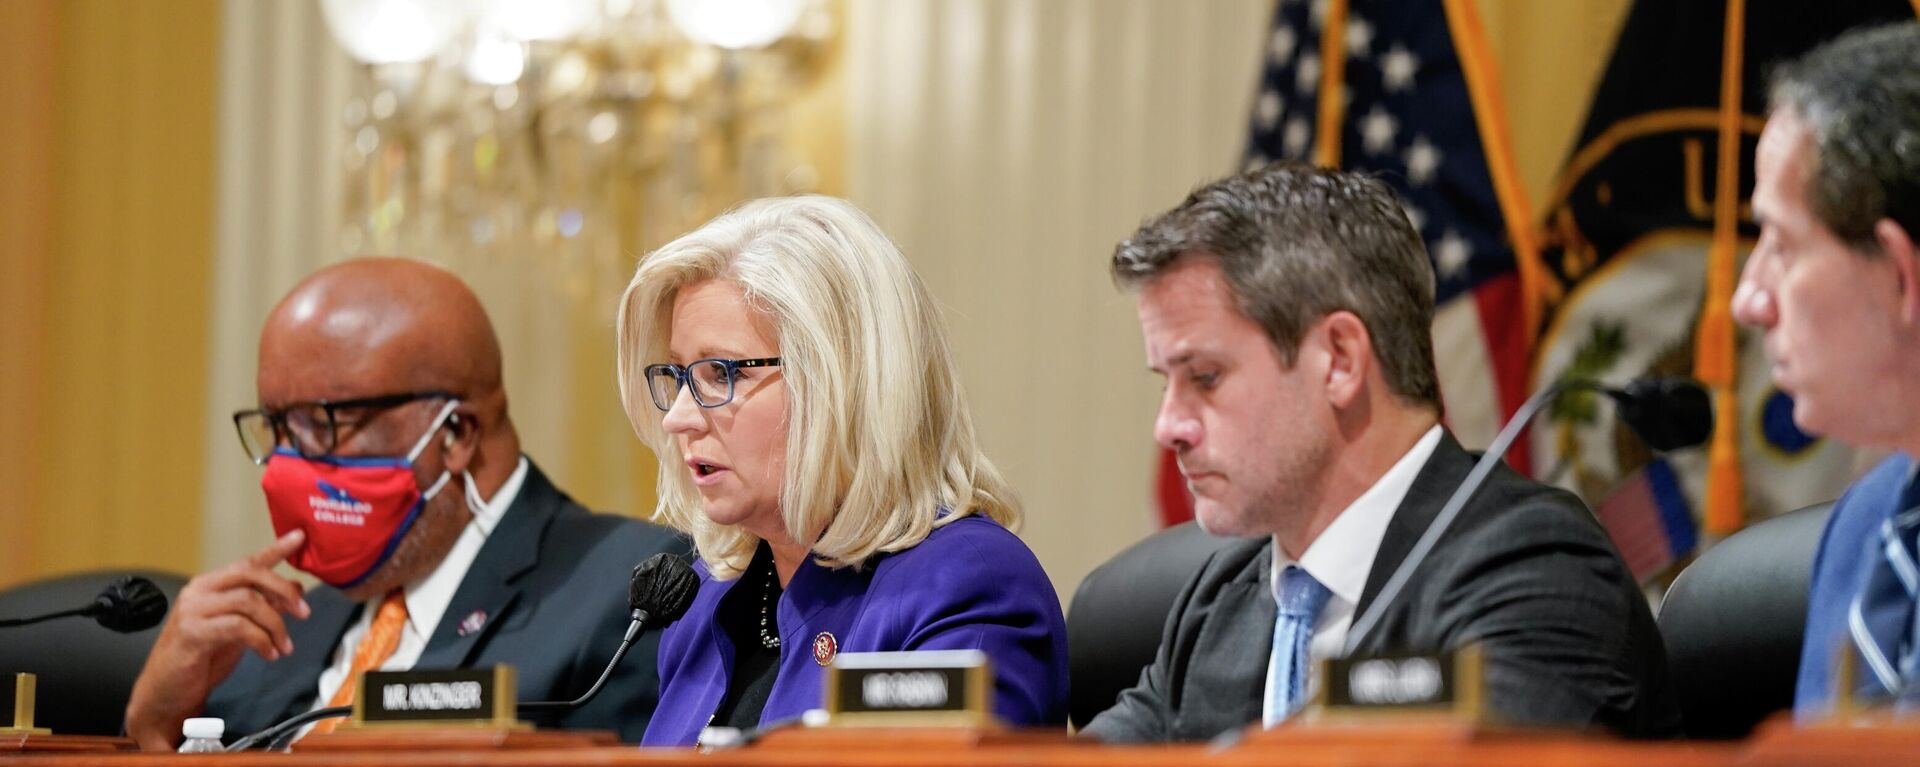 U.S. House Select Committee to Investigate the January 6th Attack on the U.S. Capitol Vice-chairperson U.S. Representative Liz Cheney (R-WY) speaks before a vote on a report recommending the U.S. House of Representatives cite Steve Bannon for criminal contempt of Congress during a meeting on Capitol Hill in Washington, U.S., October 19, 2021 - Sputnik International, 1920, 12.11.2021